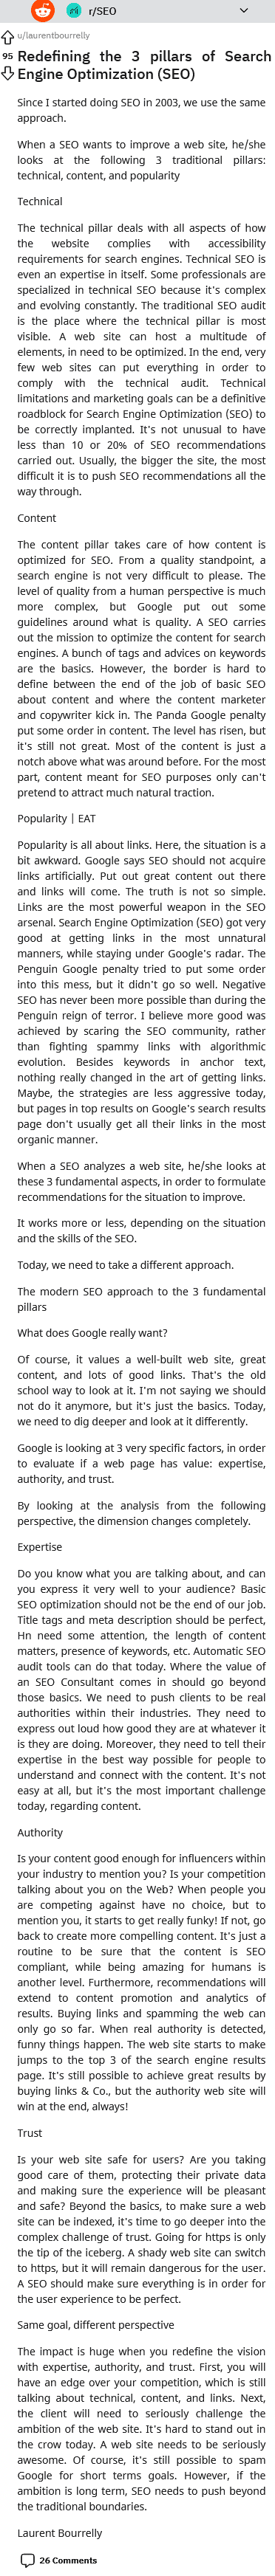 a proposal of the modern seo theory redefining popularity and eat content quality and technical seo